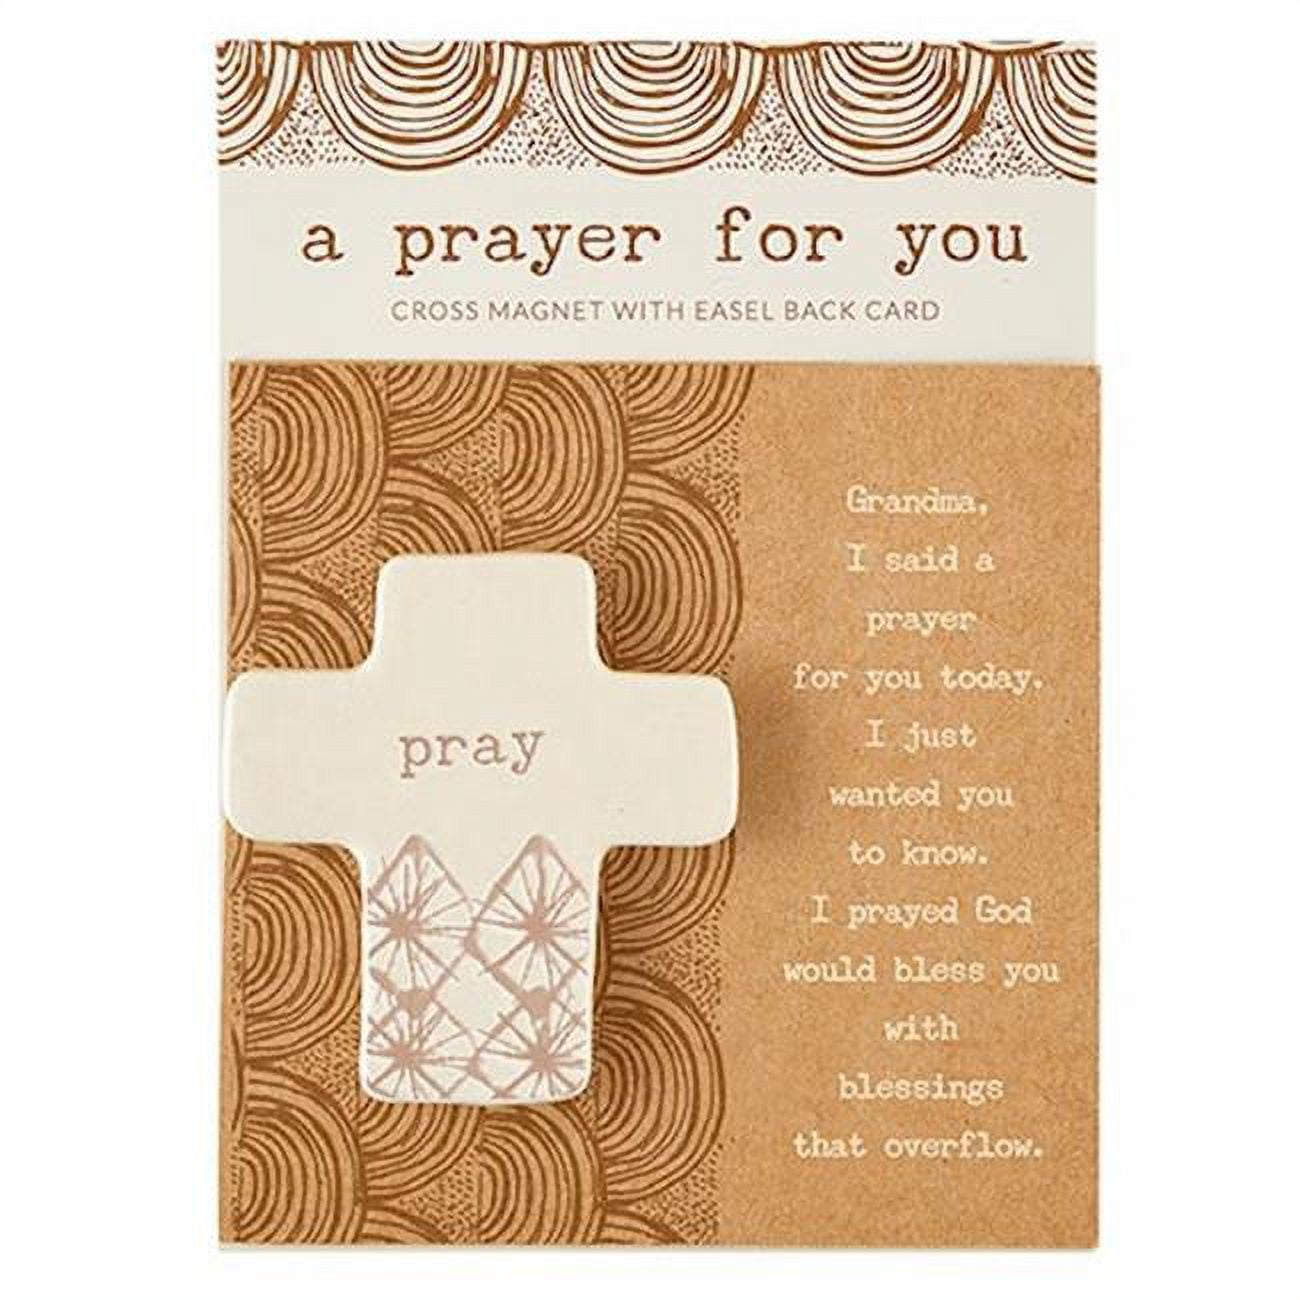 Picture of CB Gift 212495 4 in. Sq Prayer for You Magnet with Easel Back Card - Grandma